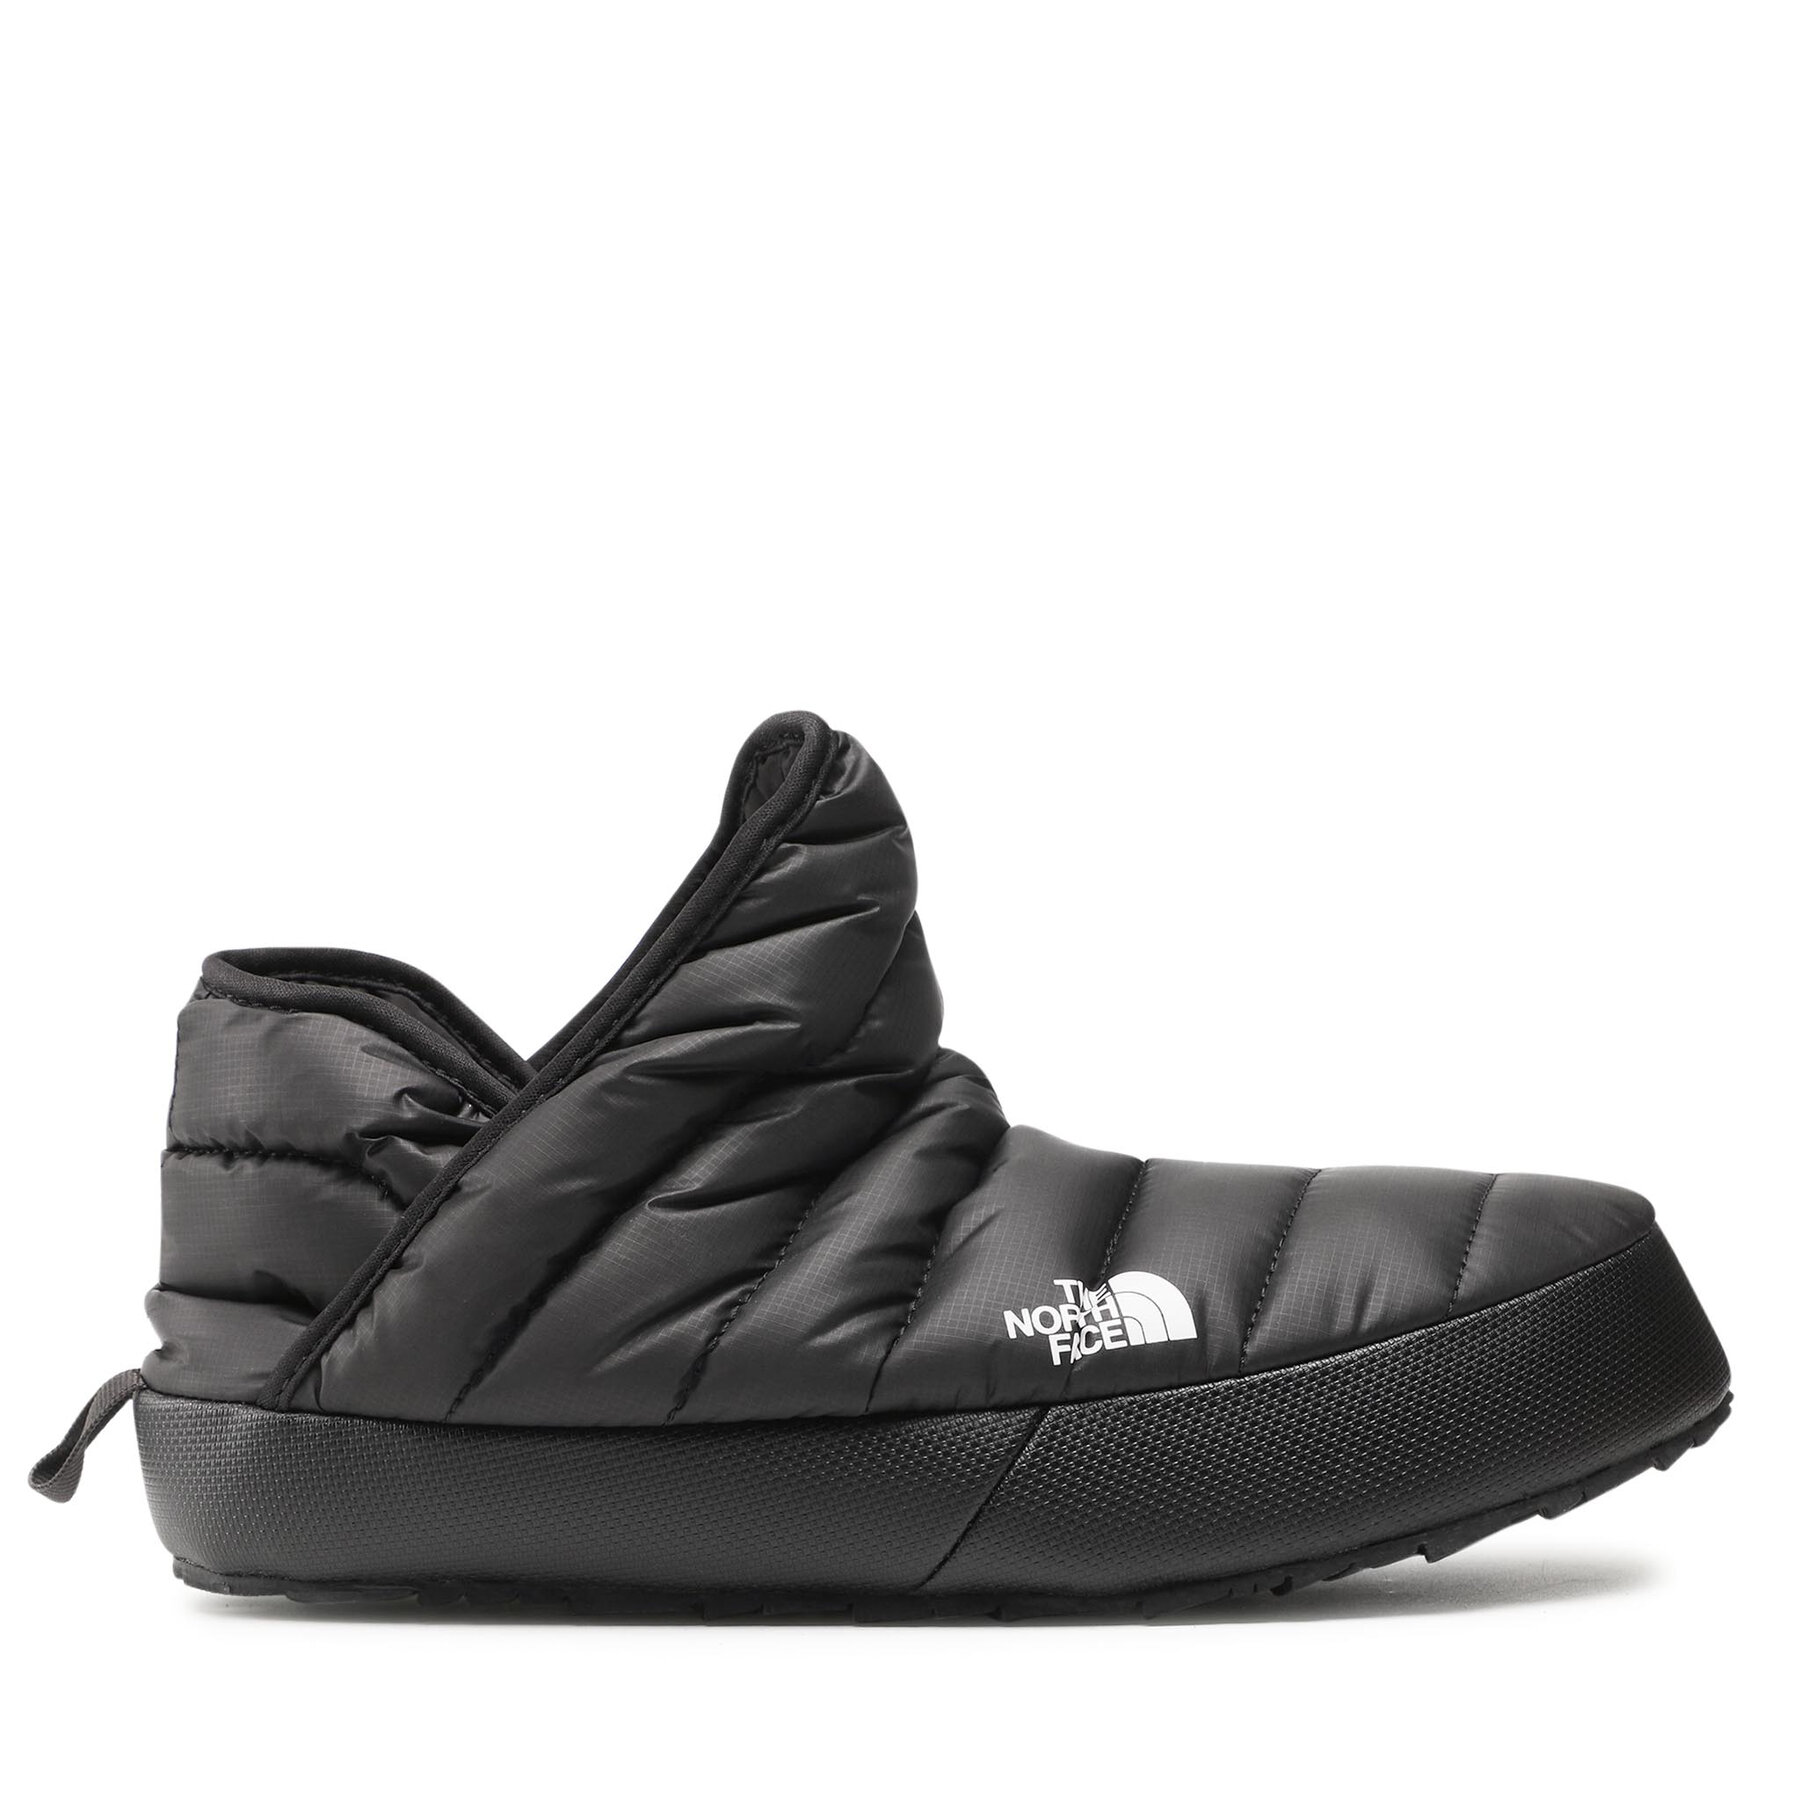 The North Face Men's Thermoball traction bootie